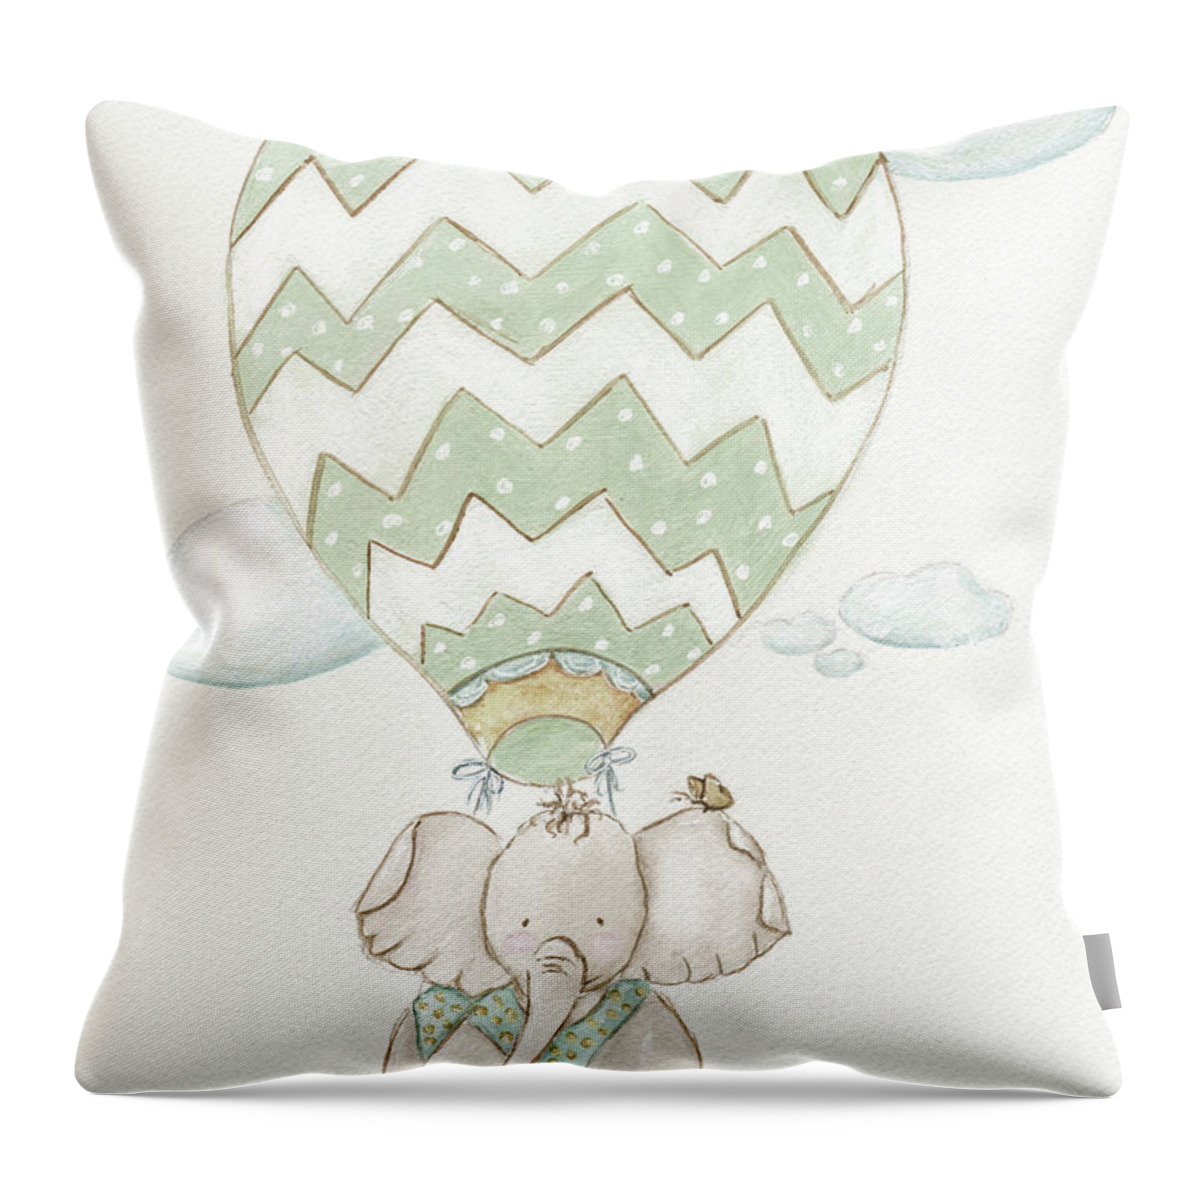 Baby Giraffe Throw Pillow featuring the painting Little Traveler Baby Elephant In Hot Air Balloon - Gender Neutral Nursery by Debbie Cerone